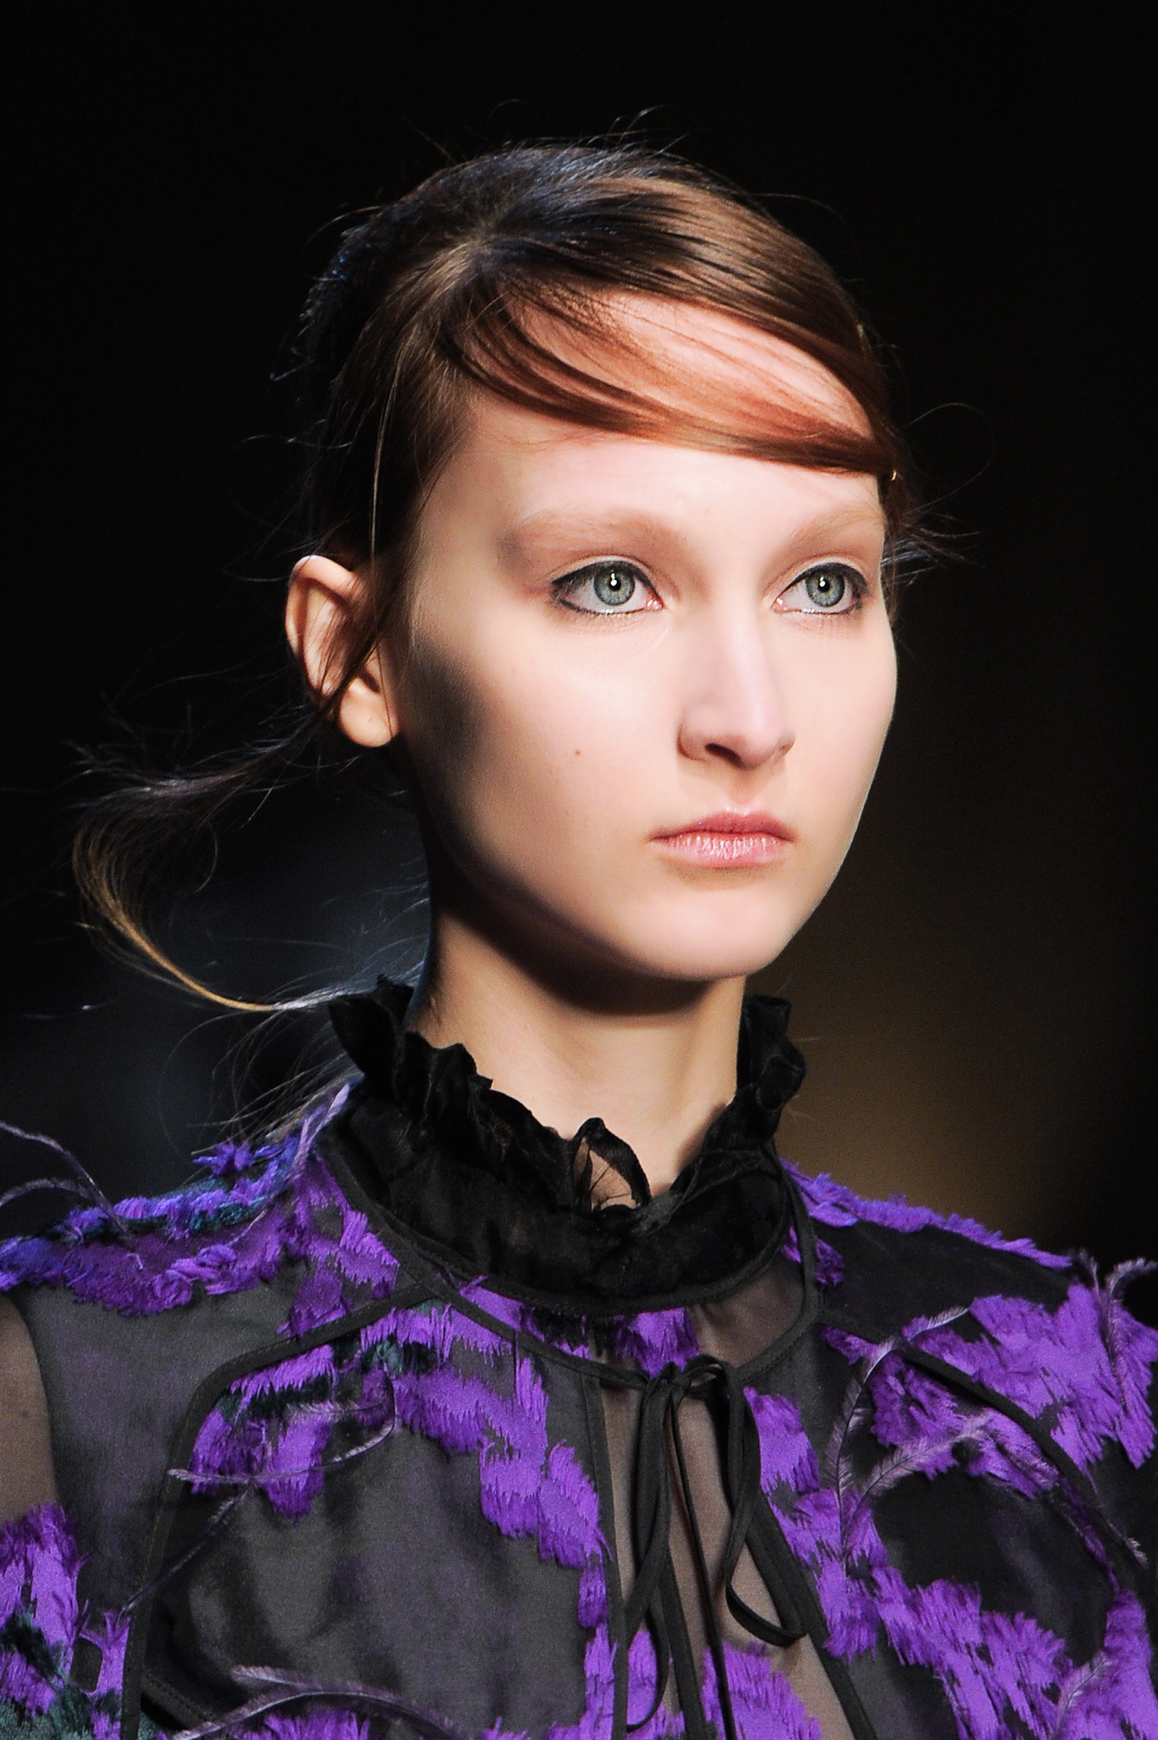 Hair and Make-up Trends Autumn-Winter 2015